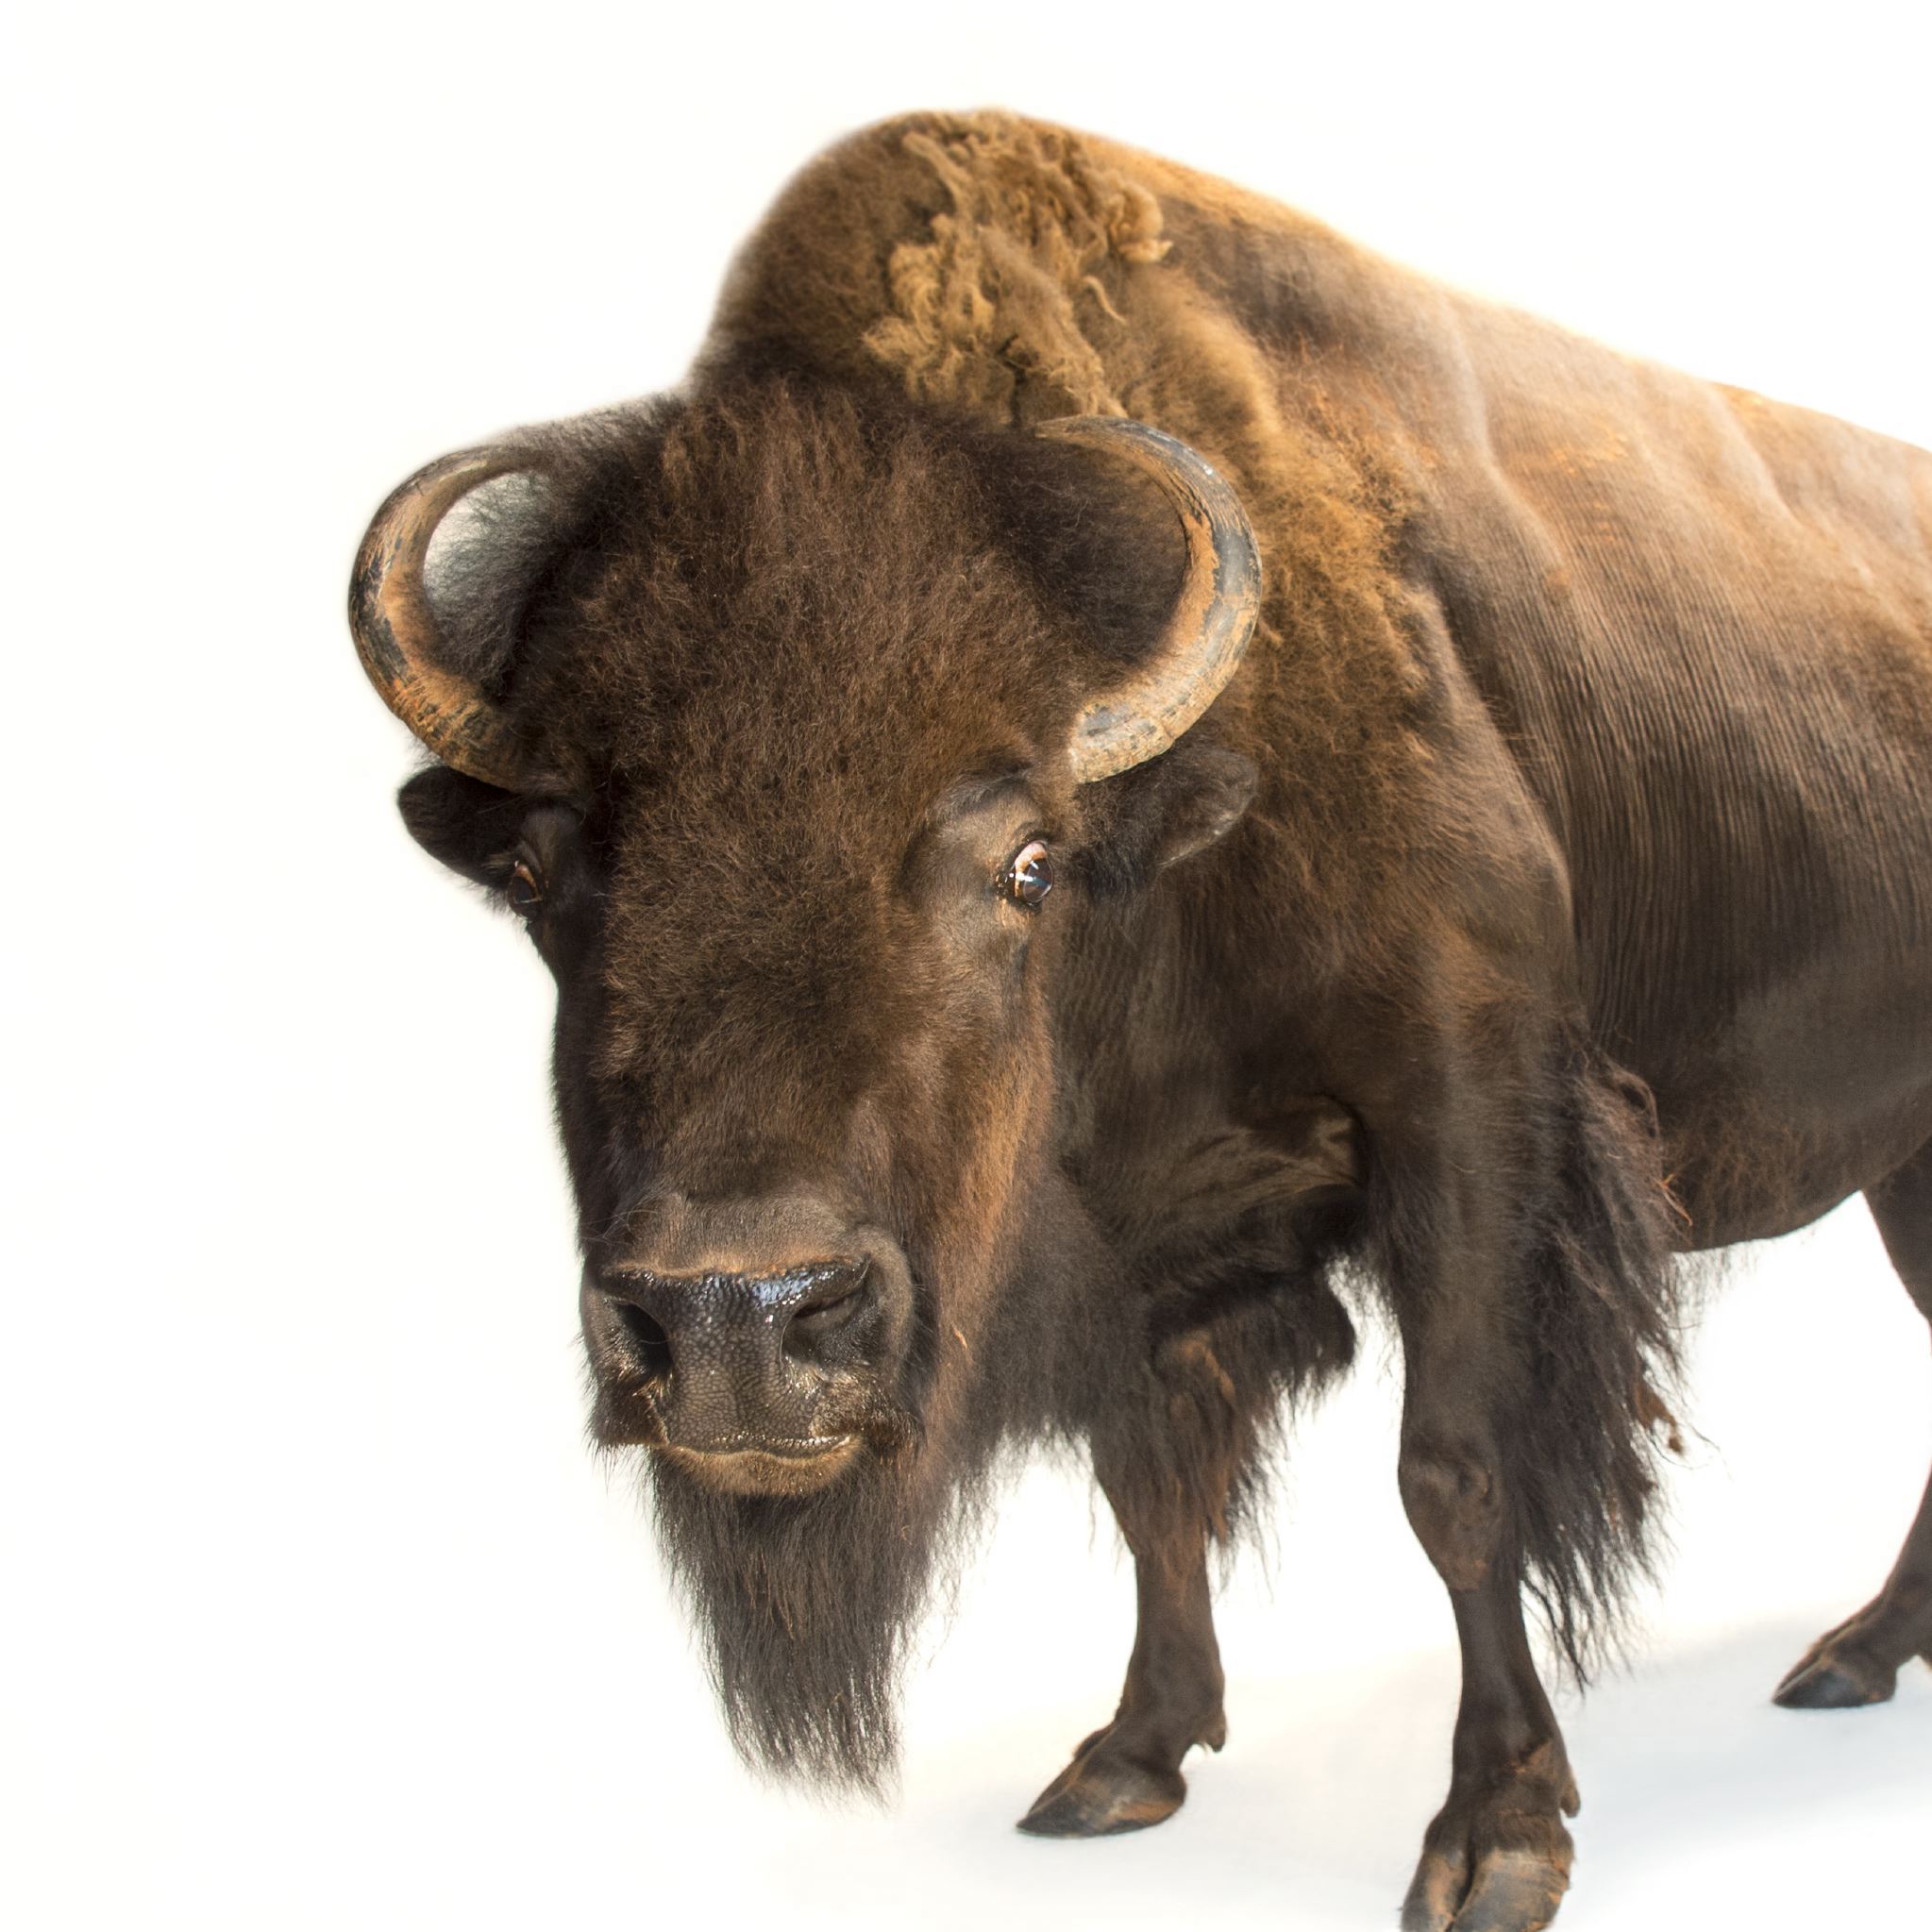 American Bison High Quality Background on Wallpapers Vista